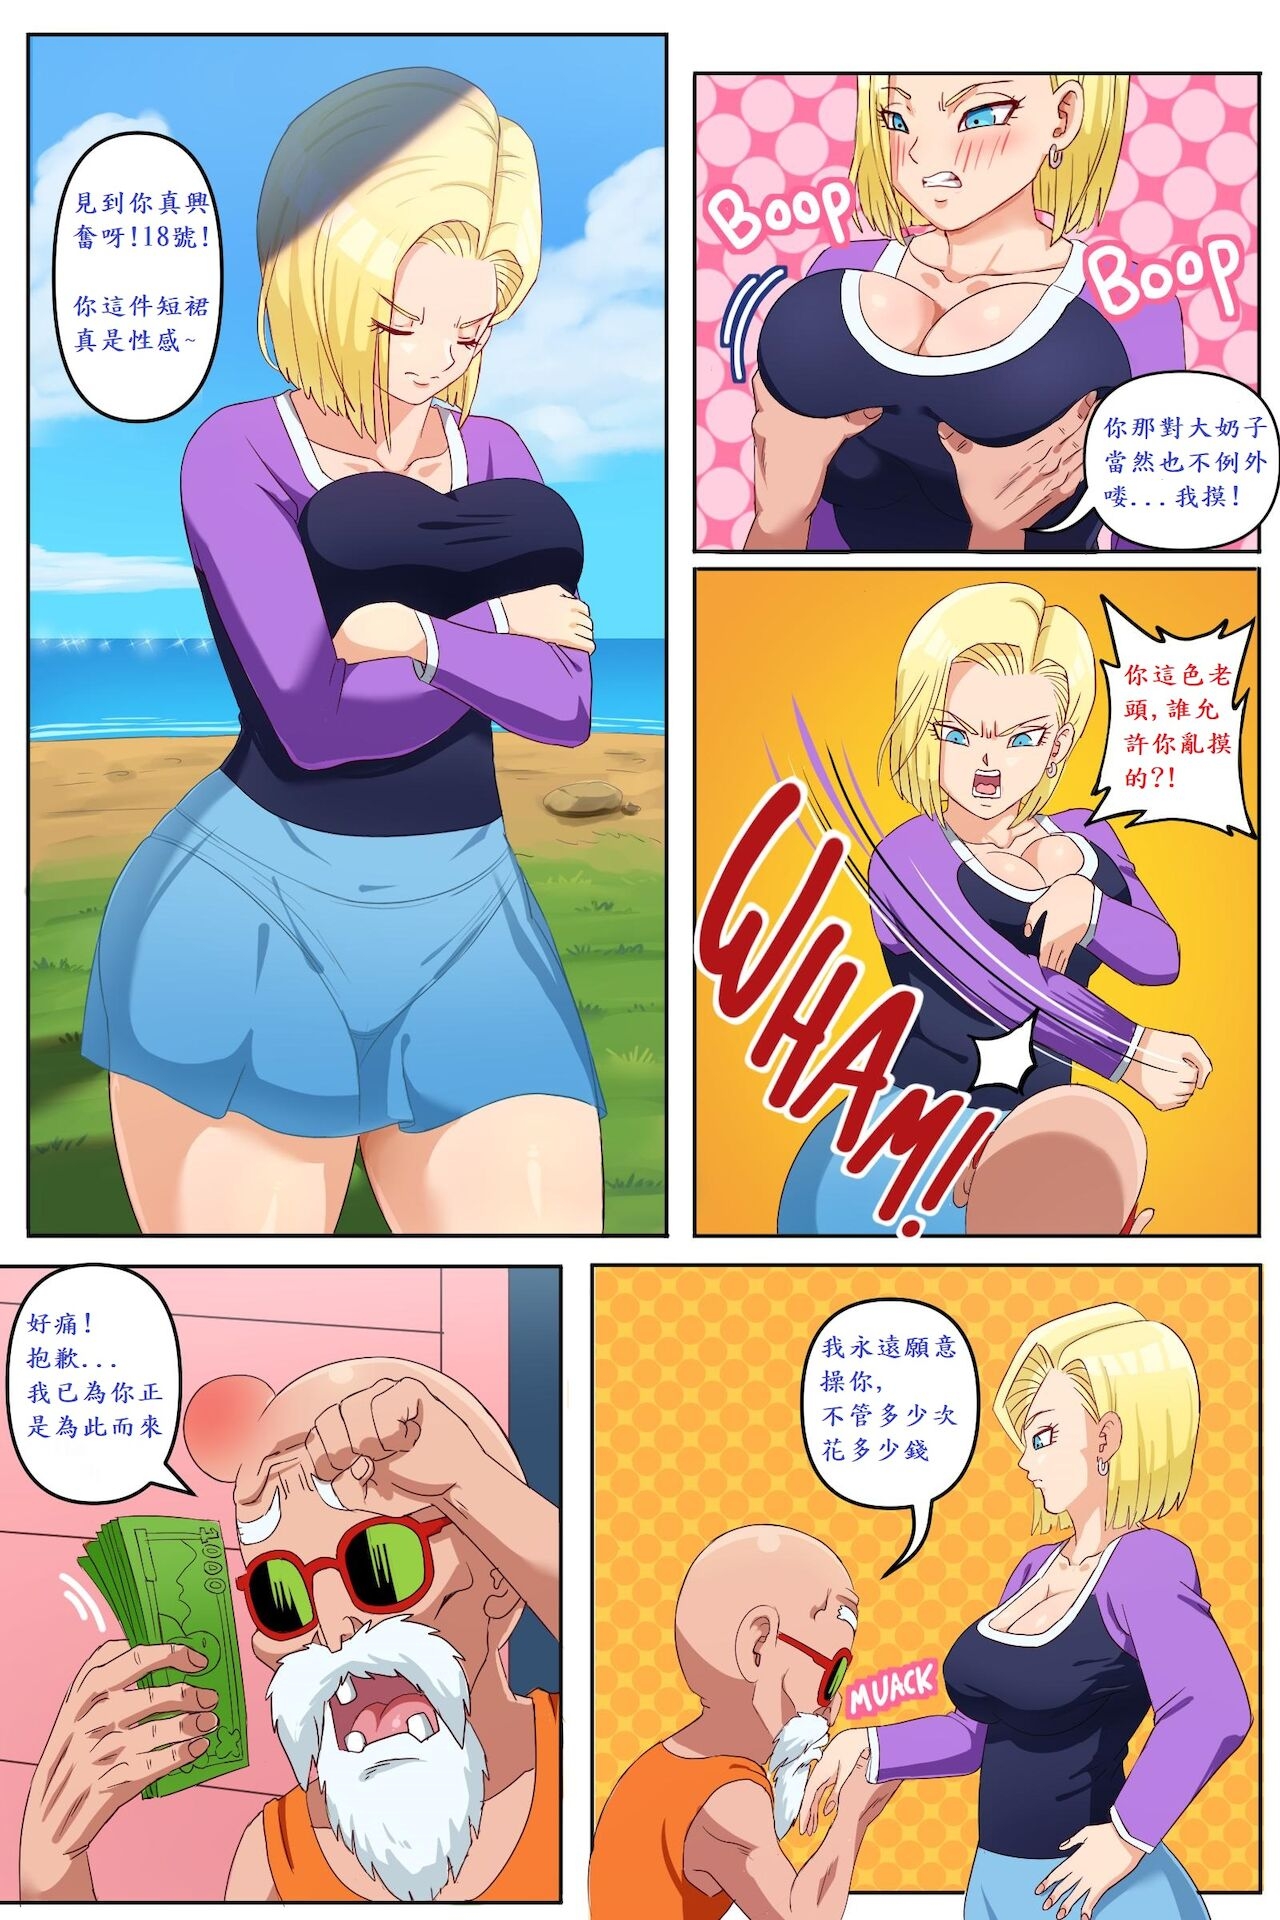 [Pink Pawg] Android 18 NTR 1 (Chinese) 2